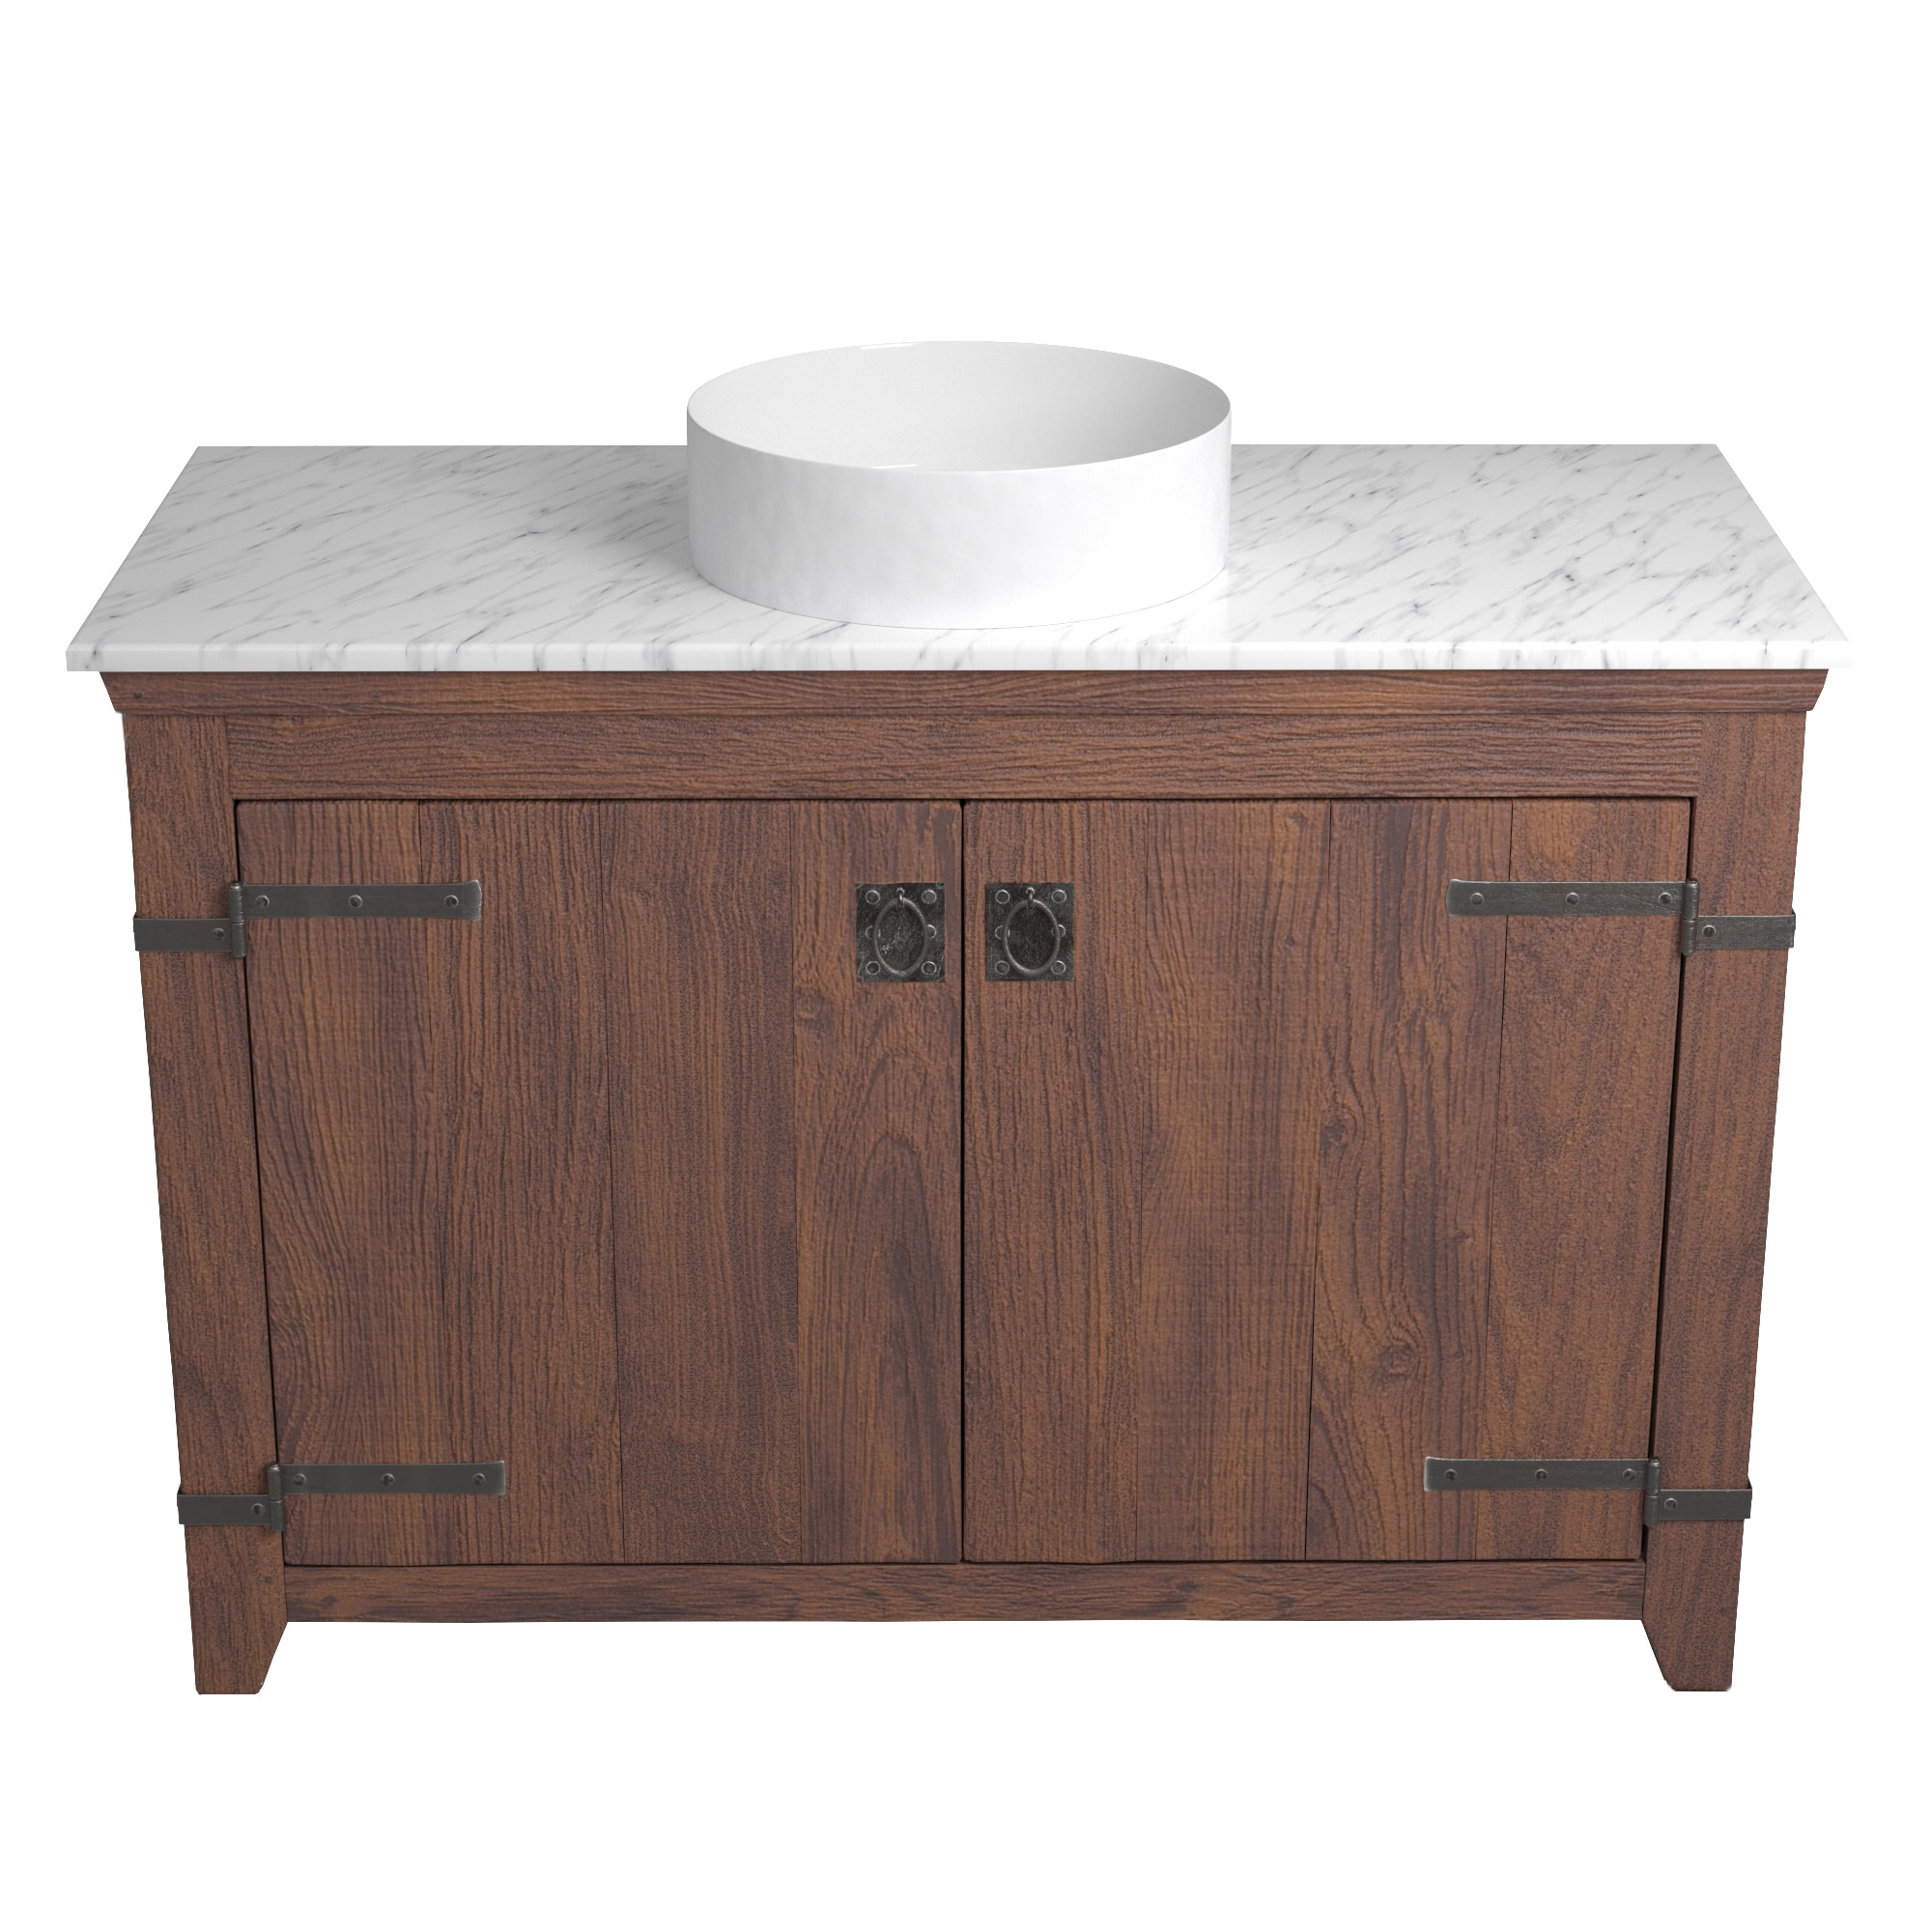 Native Trails 48" Americana Vanity in Chestnut with Carrara Marble Top and Positano in Bianco, Single Faucet Hole, BND48-VB-CT-MG-051